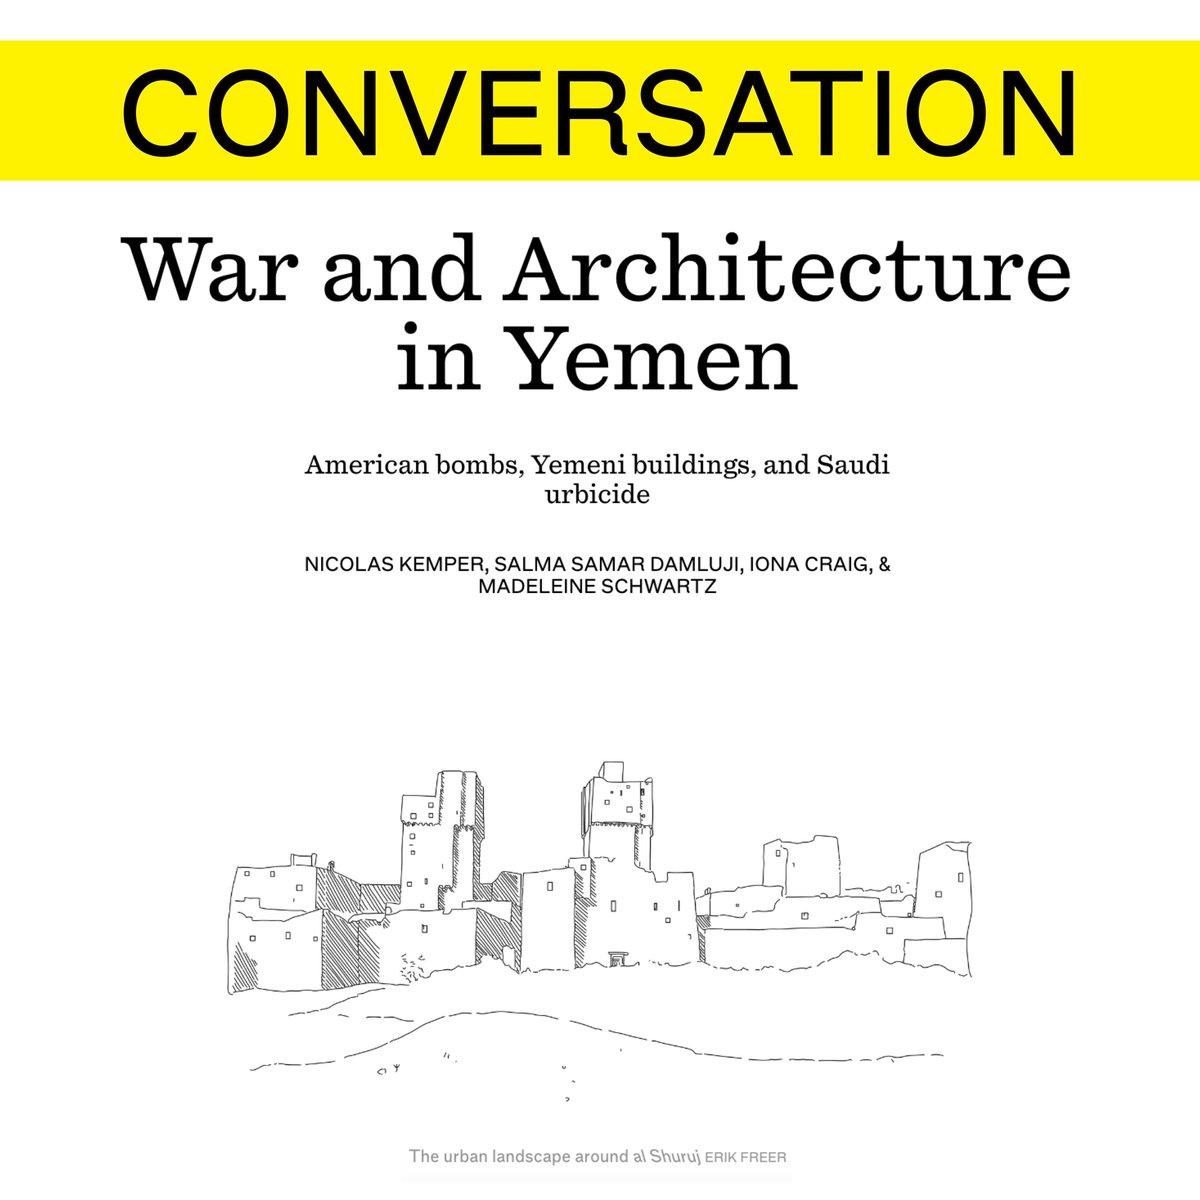 “I hope the world will discover before it’s too late that Yemen has a uniquely rich architectural heritage.' @kemper_nicolas, @ionacraig, Salma Samar Damluji, and @mmschwartz on war and architecture in Yemen, originally published in 2021. nyra.nyc/articles/war-a…